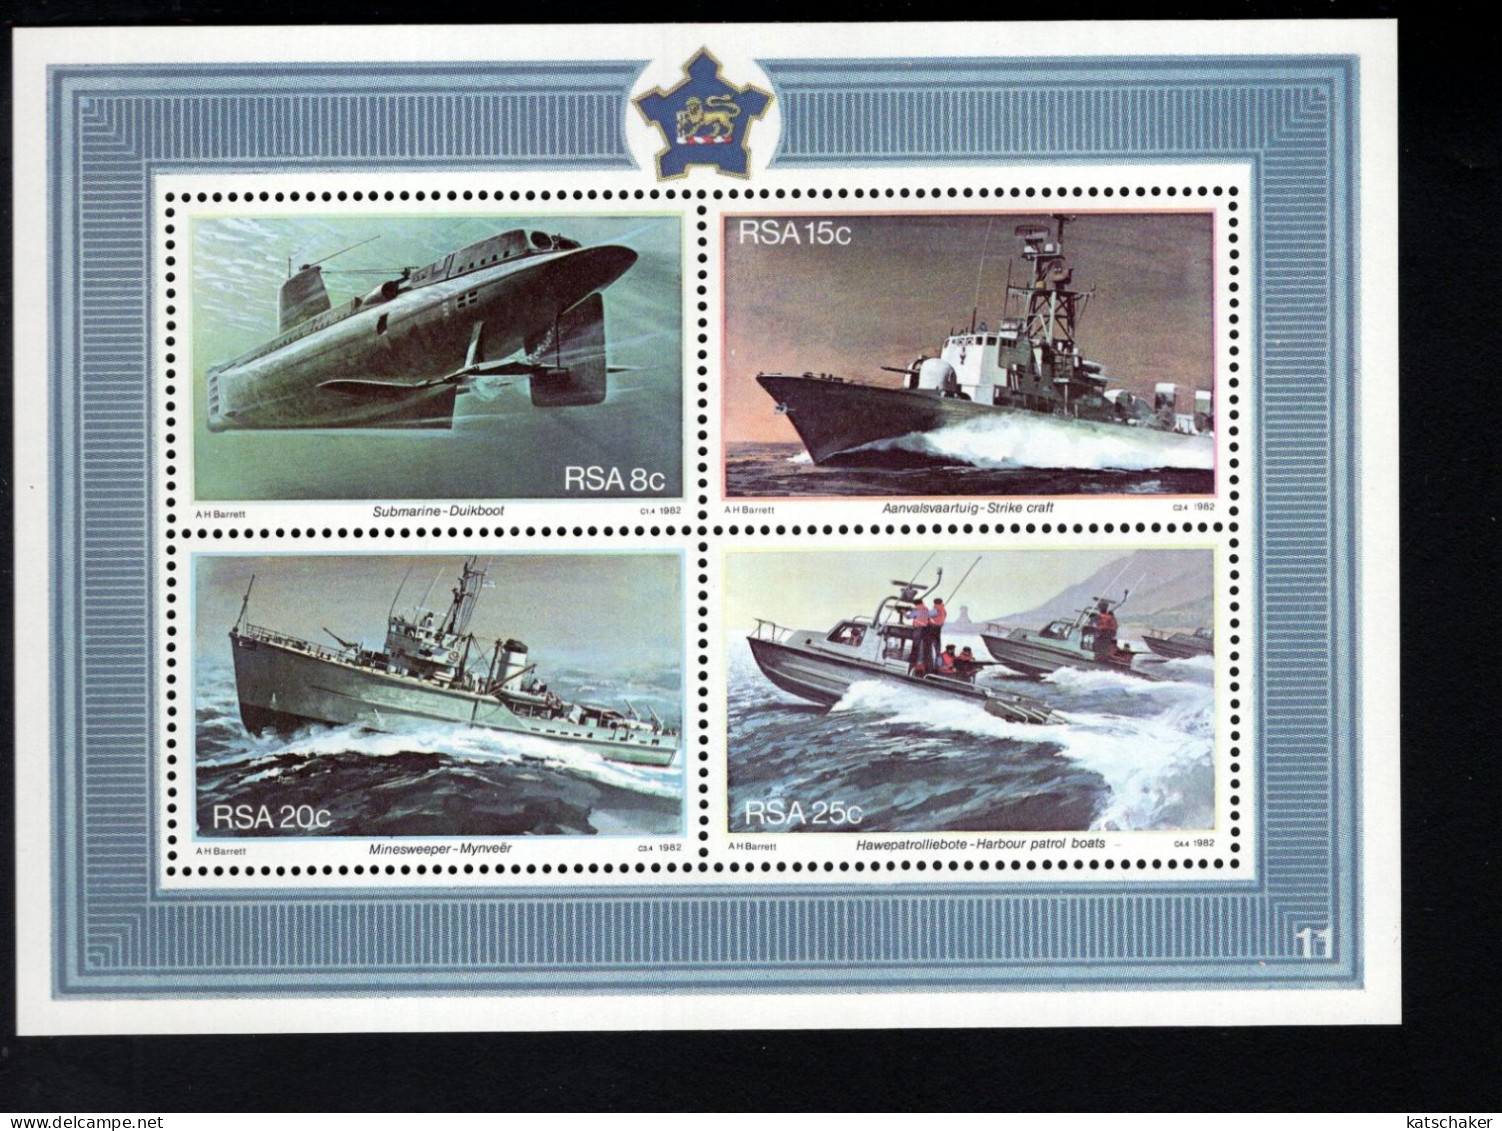 2031905948 1982 SCOTT 563A (XX)  POSTFRIS MINT NEVER HINGED - RETURN OF SIMONSTOWN NAVAL BASE - 25TH ANNIV - SHIPS - Unused Stamps